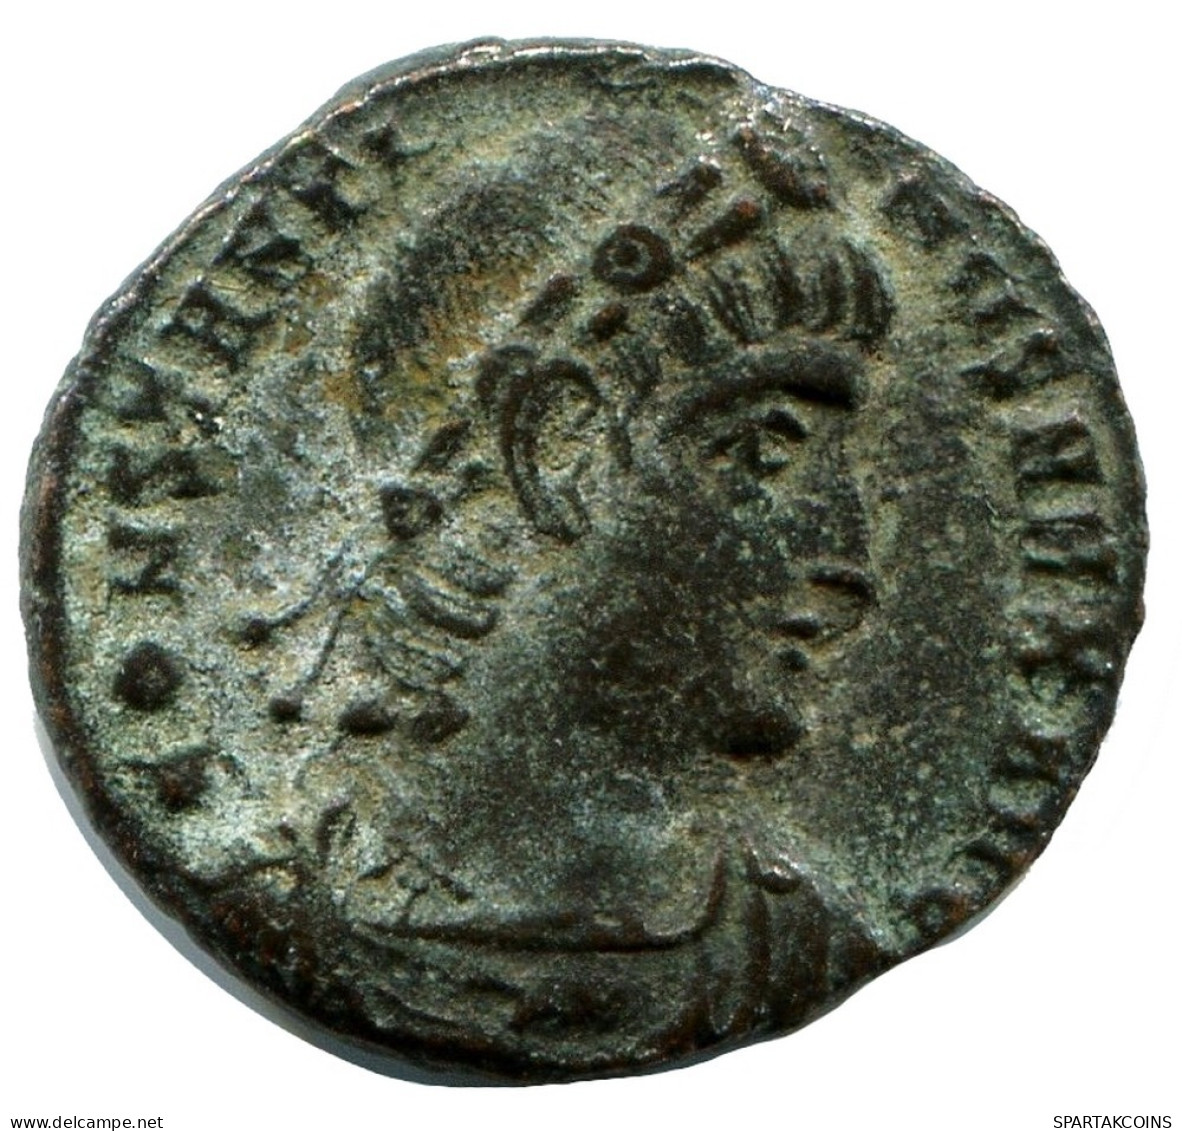 CONSTANTINE I MINTED IN NICOMEDIA FOUND IN IHNASYAH HOARD EGYPT #ANC10949.14.D.A - L'Empire Chrétien (307 à 363)